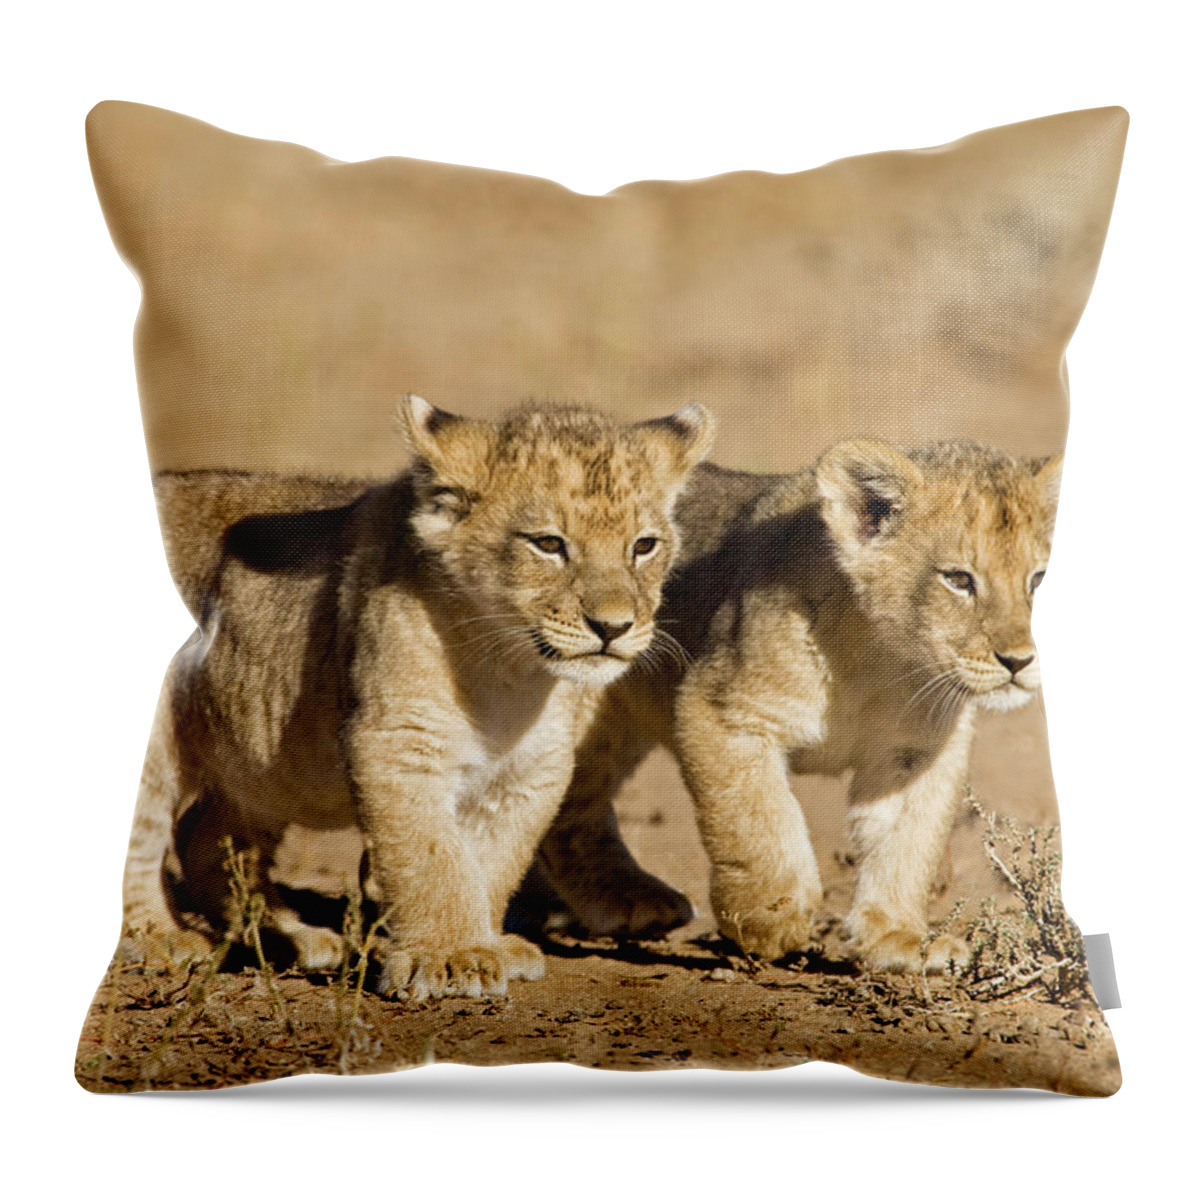 Botswana Throw Pillow featuring the photograph Africa, Namibia, African Lion Cubs by Westend61